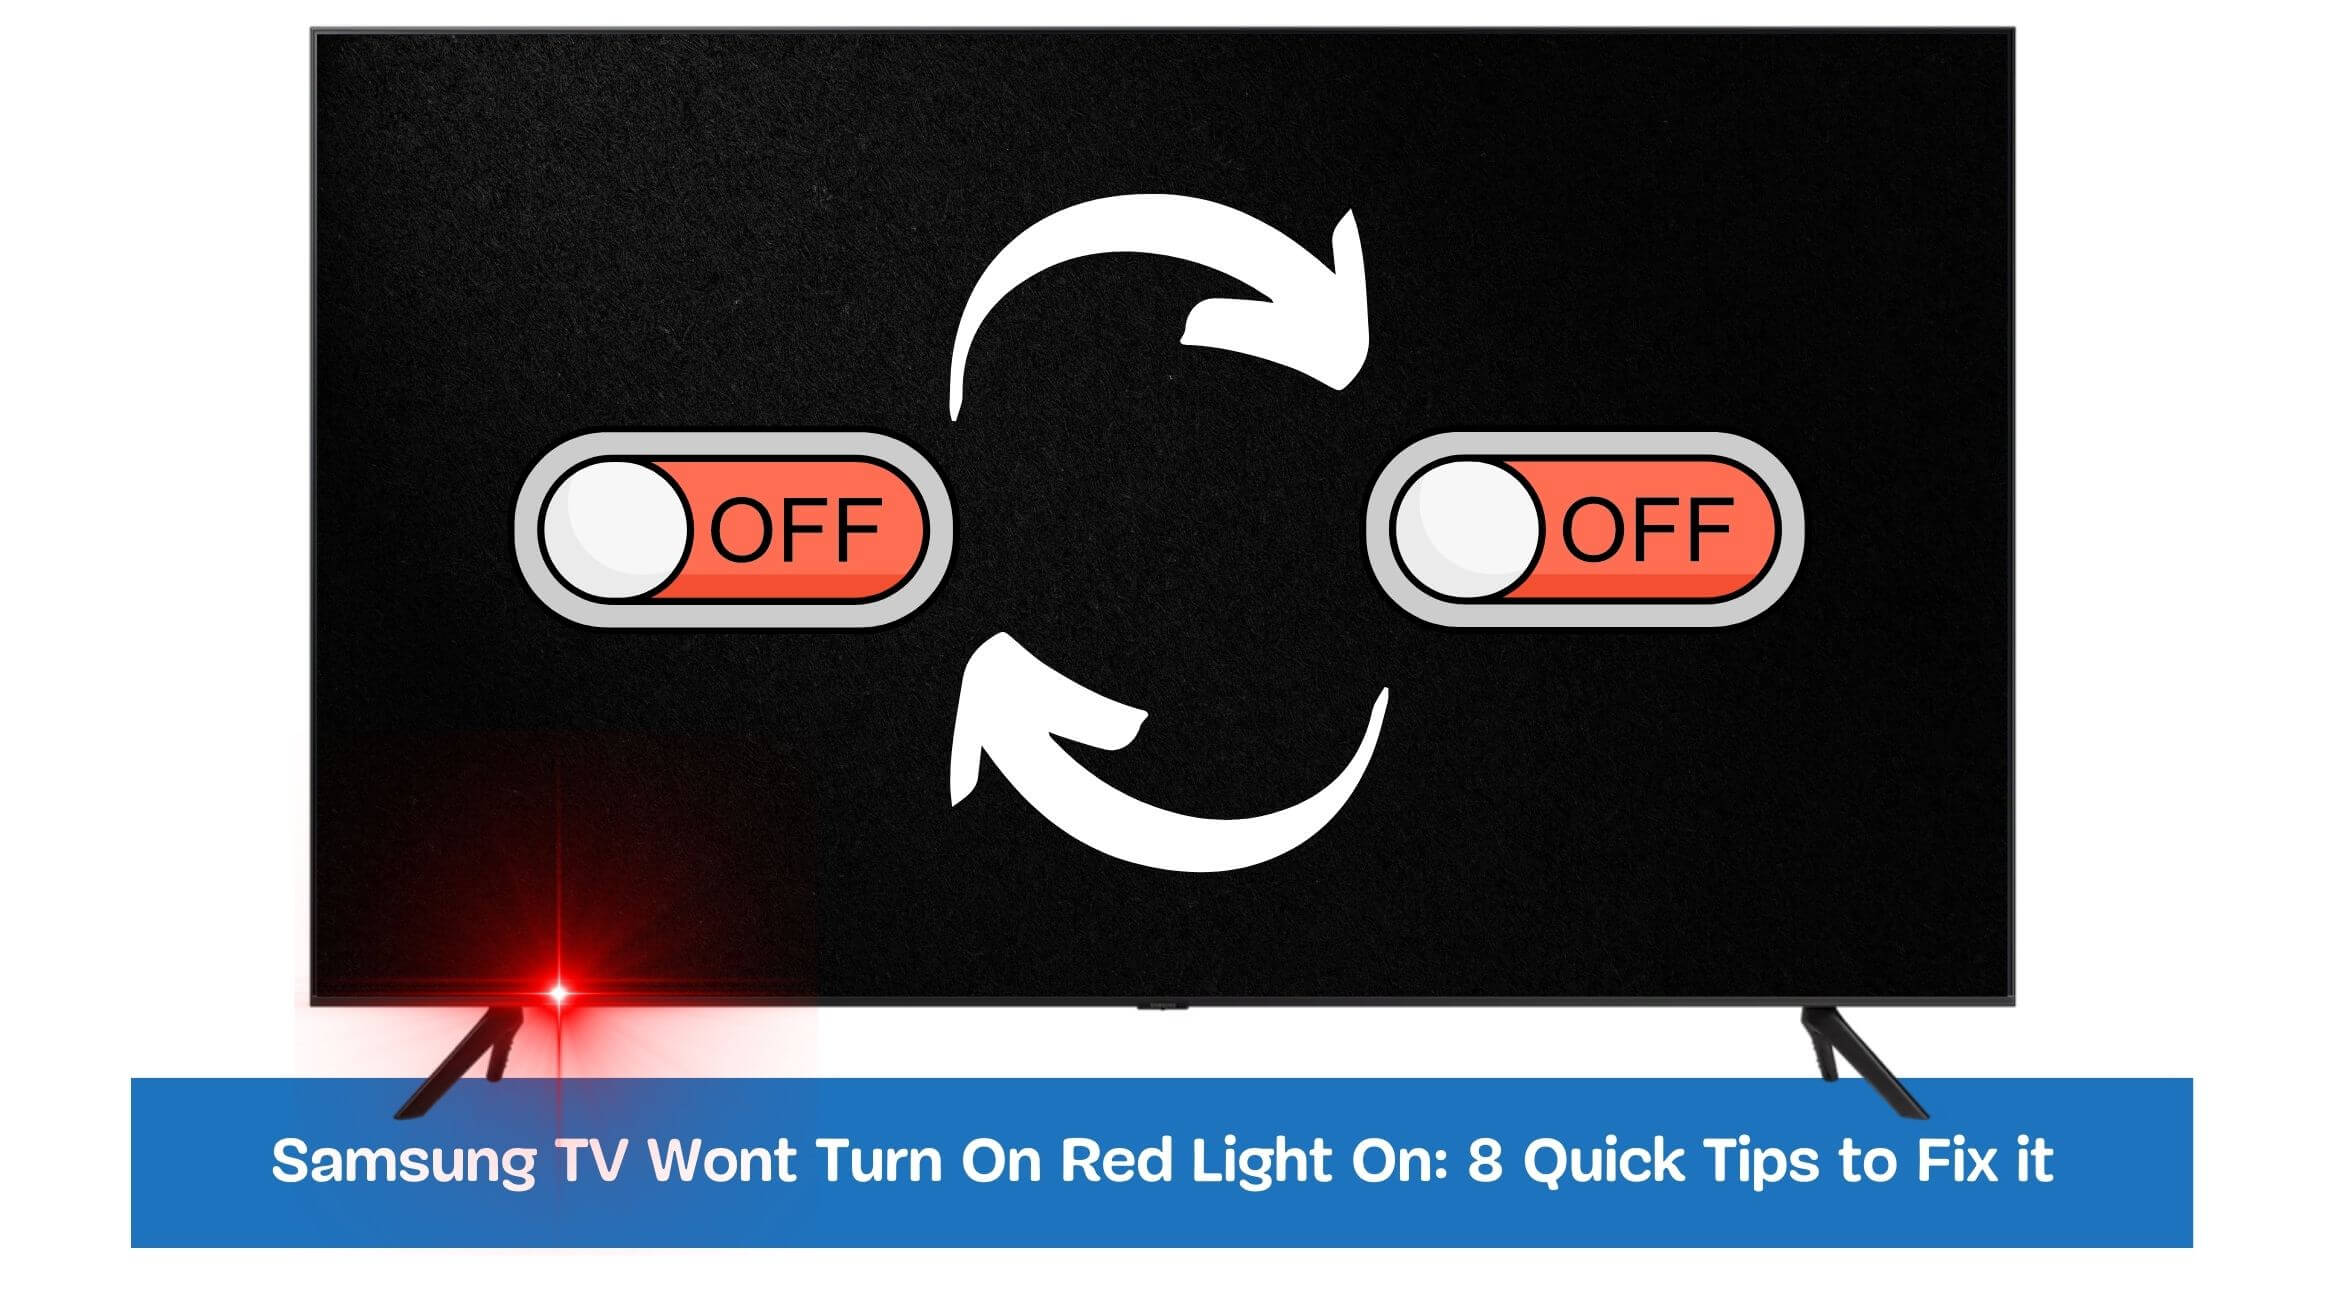 Samsung TV Wont Turn On Red Light On: 8 Quick Tips to Fix it